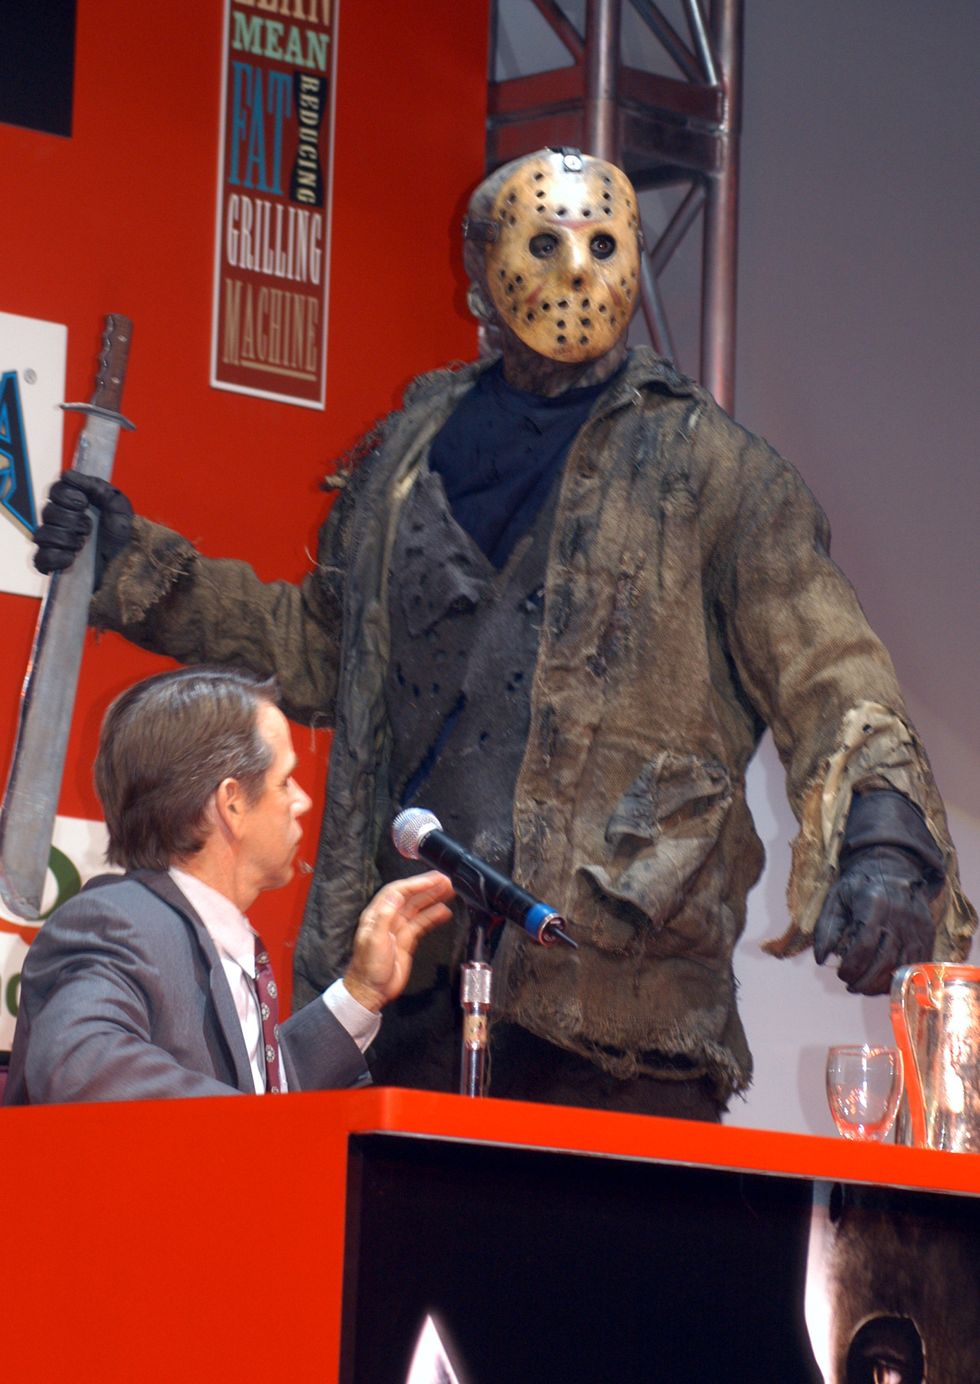 robert englund and ken kirzinger face off in las vegas to promote the film "freddy vs jason"